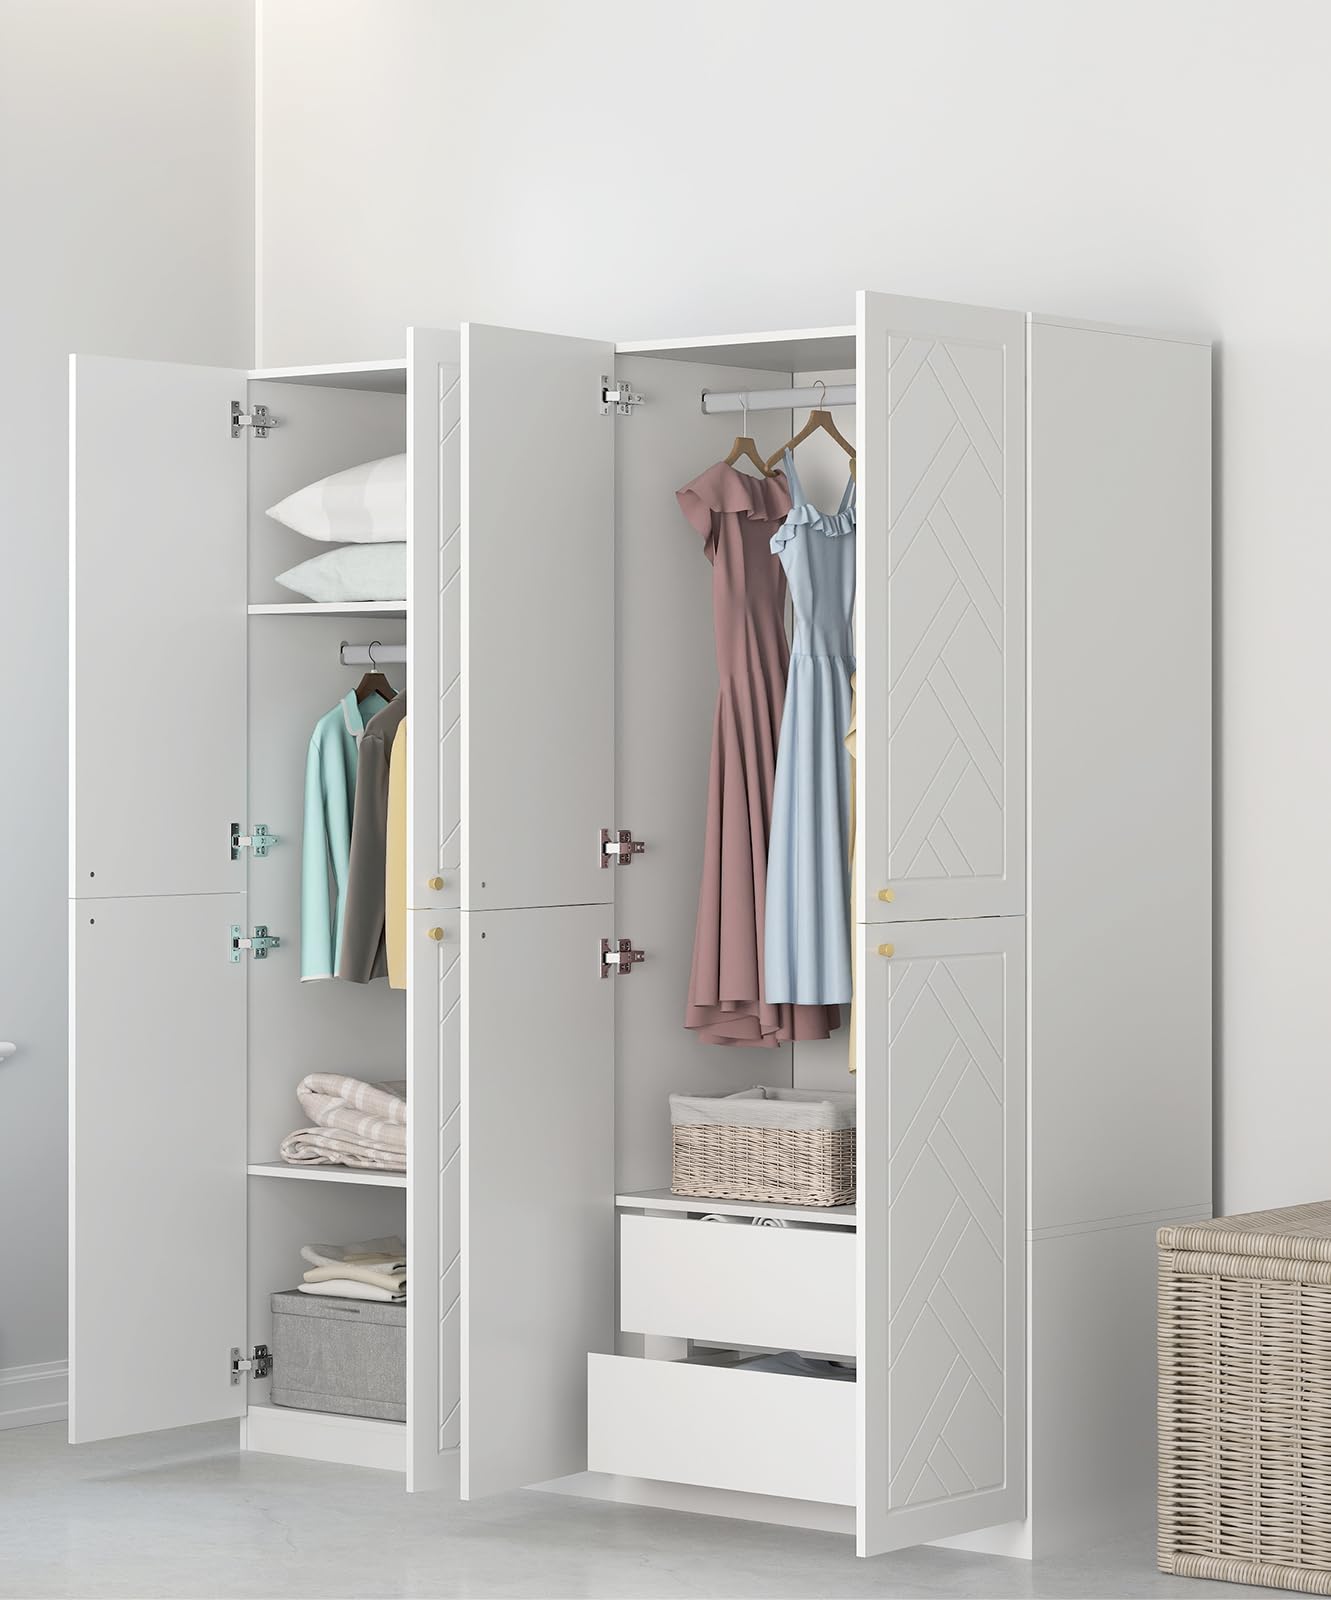 63" Wide Armoire Wardrobe Closet, 4 Door 2 Drawers Large Storage Cabinet, Wooden Organizer with 2 Shelves and 2 Hanging Rods 63 "L x 20.28 "W x 71.65 "H White